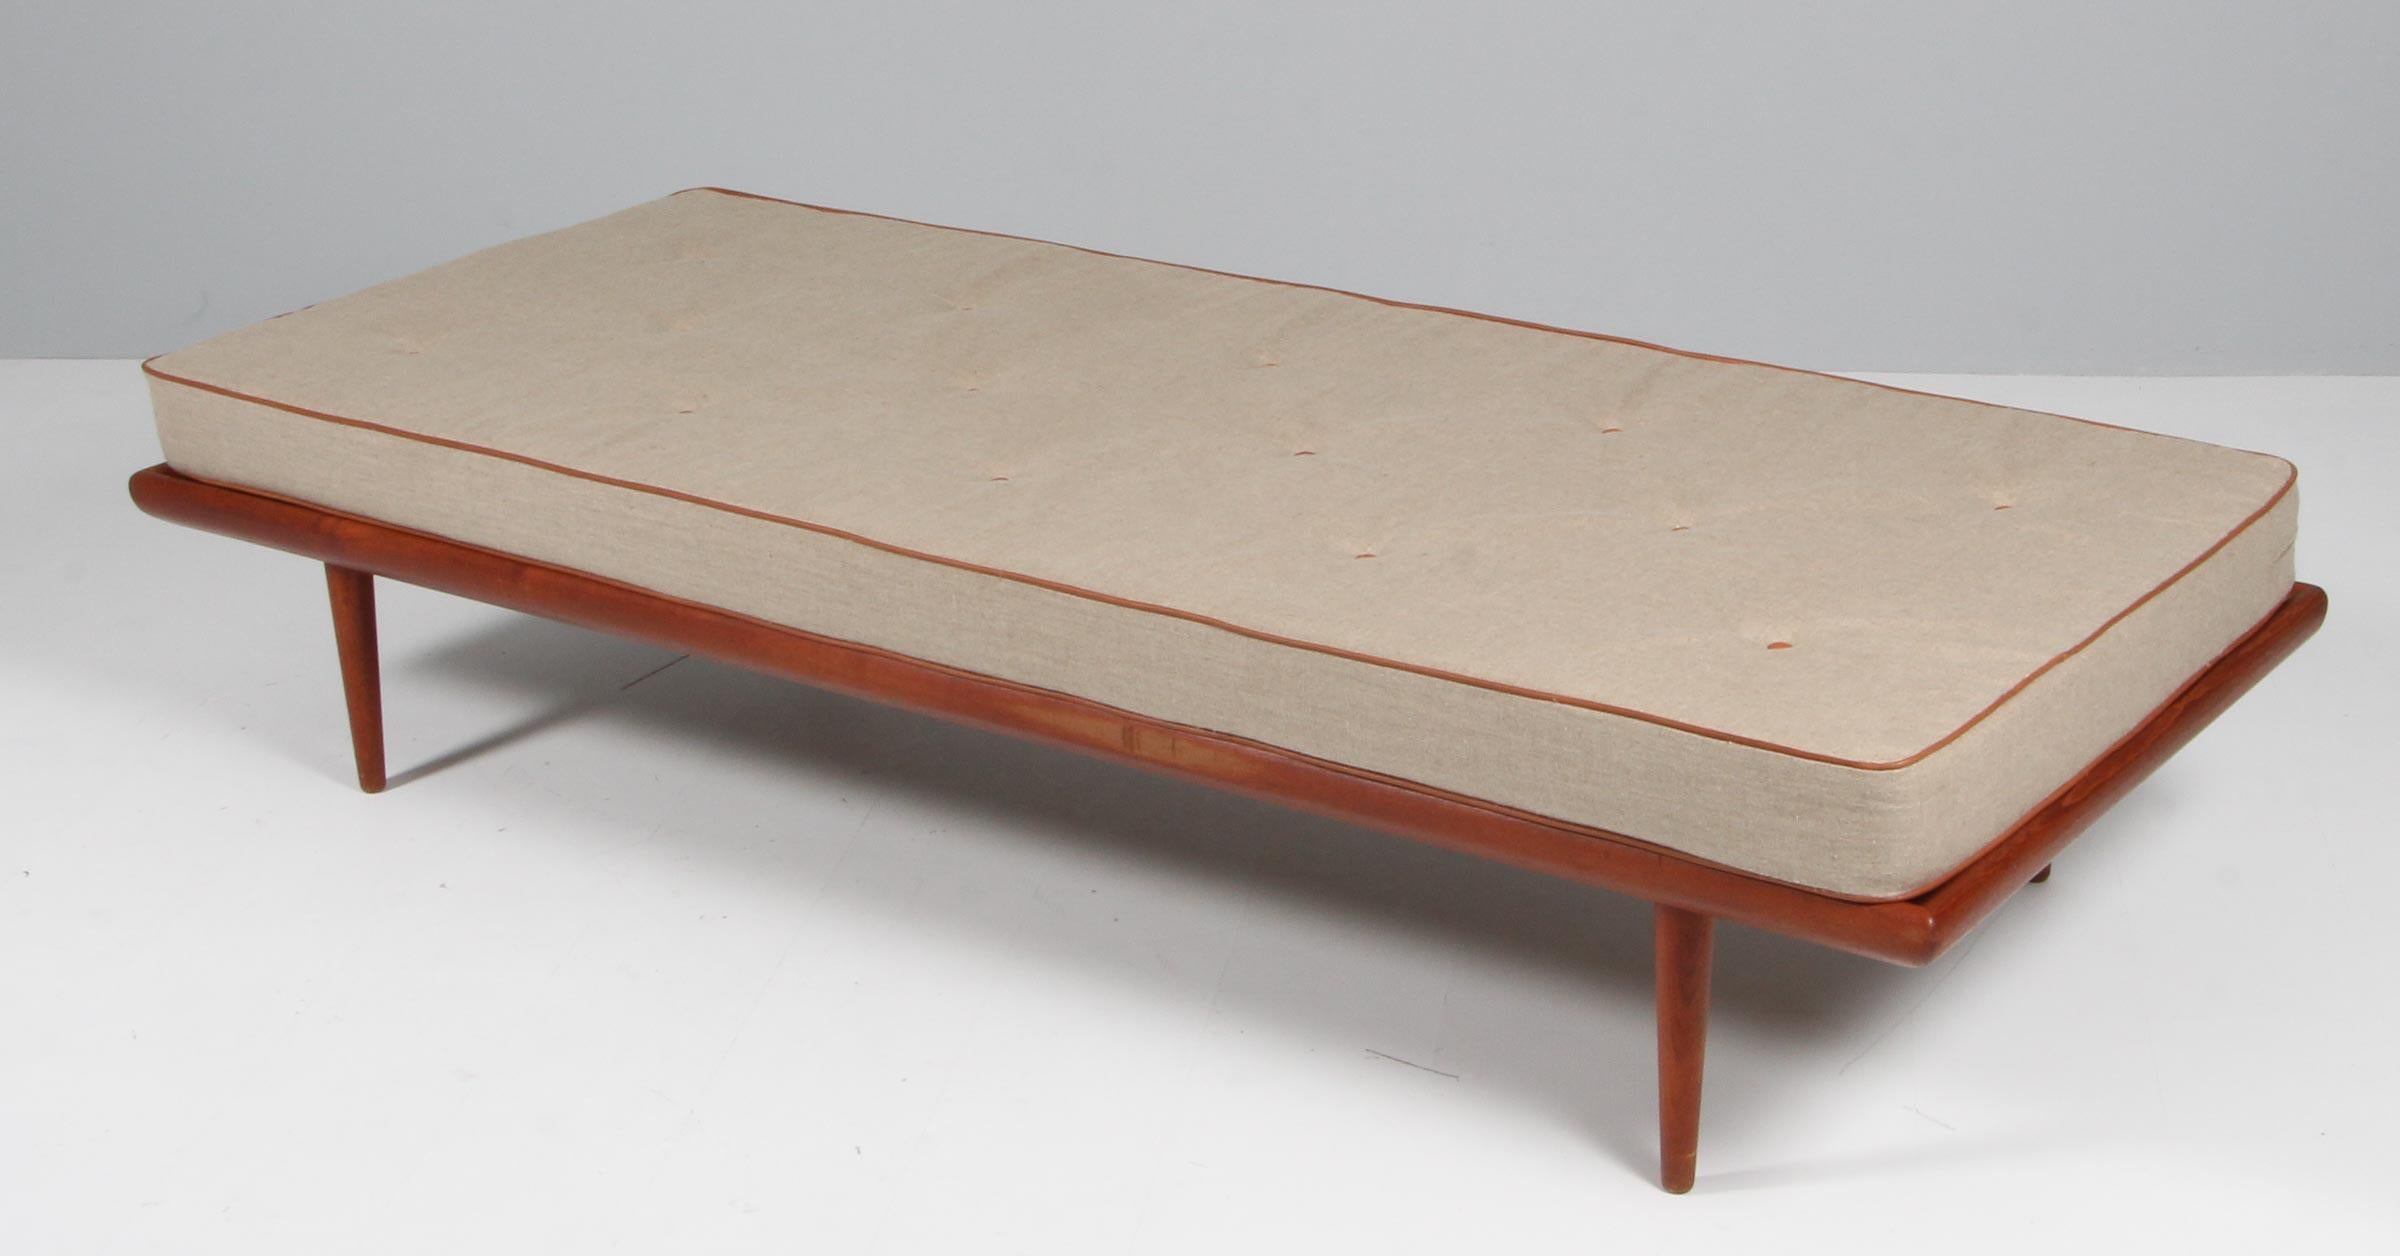 Peter Hvidt & Orla Mølgaard Nielsen daybed with solid teak frame.

New upholstered cushion with canvas and cognac aniline leather details.

Made by France & Daverkosen in the 1960s.